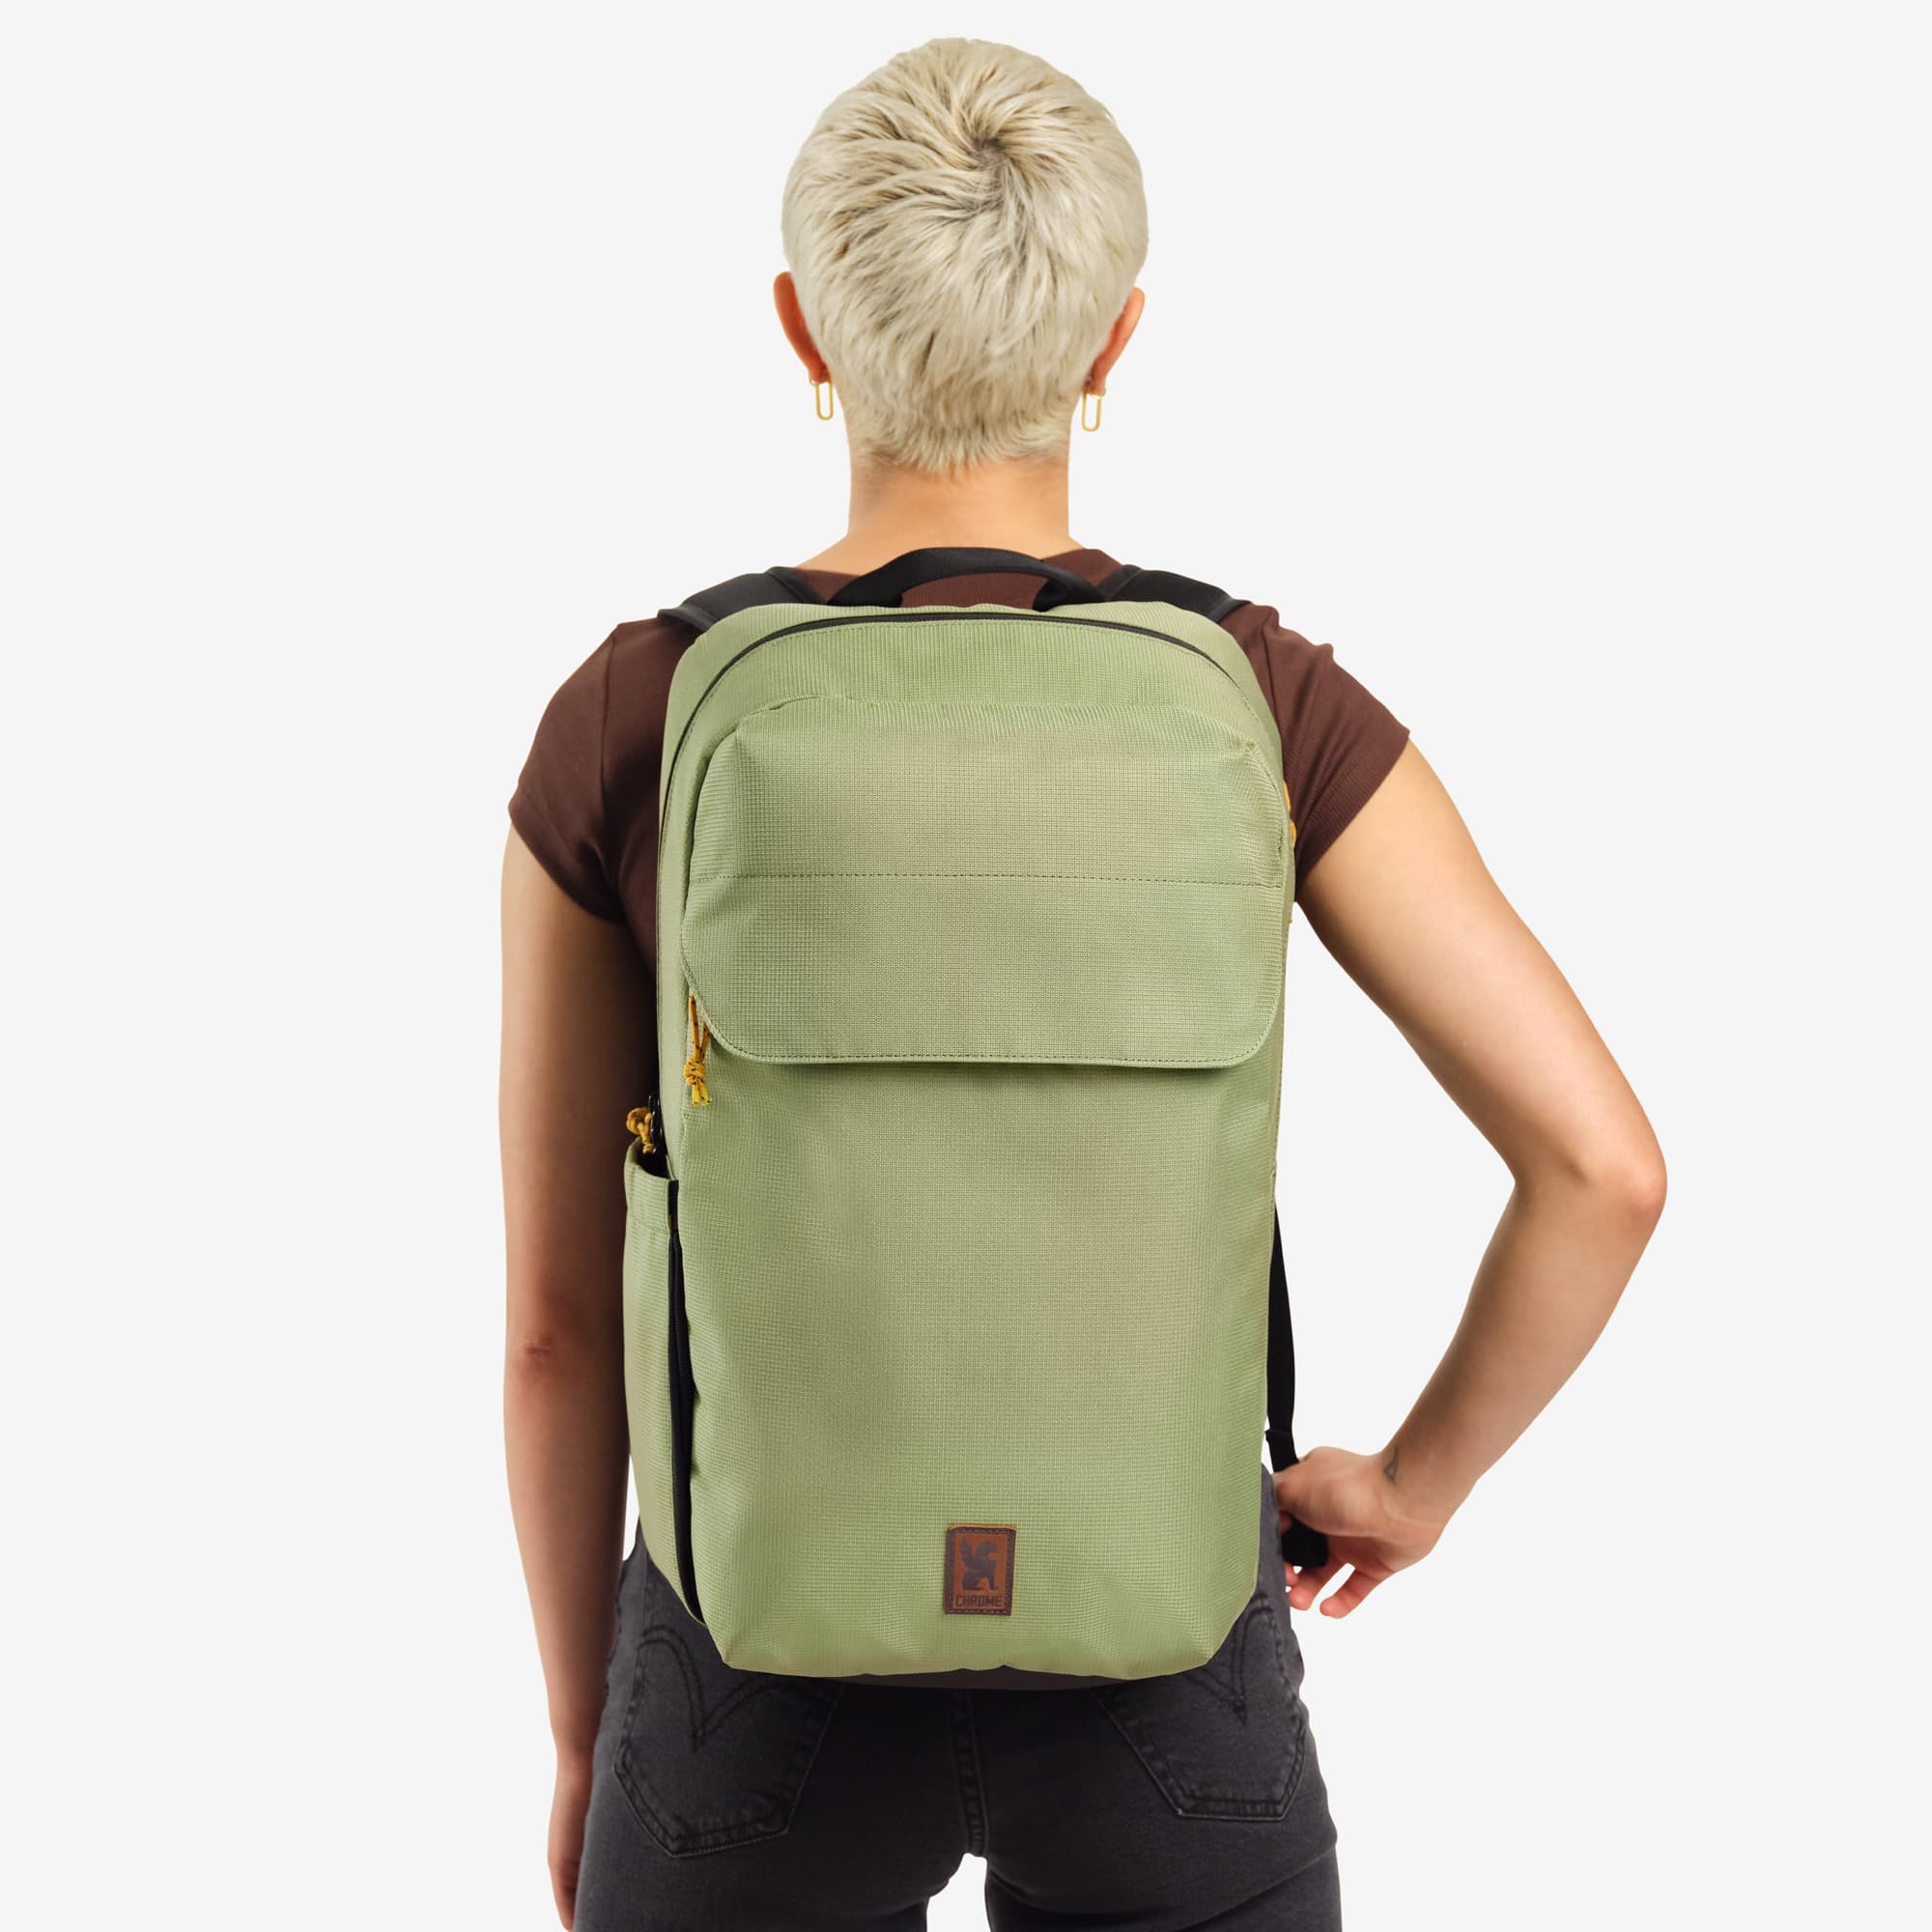 Ruckas 23L Backpack in green worn by a woman #color_oil green